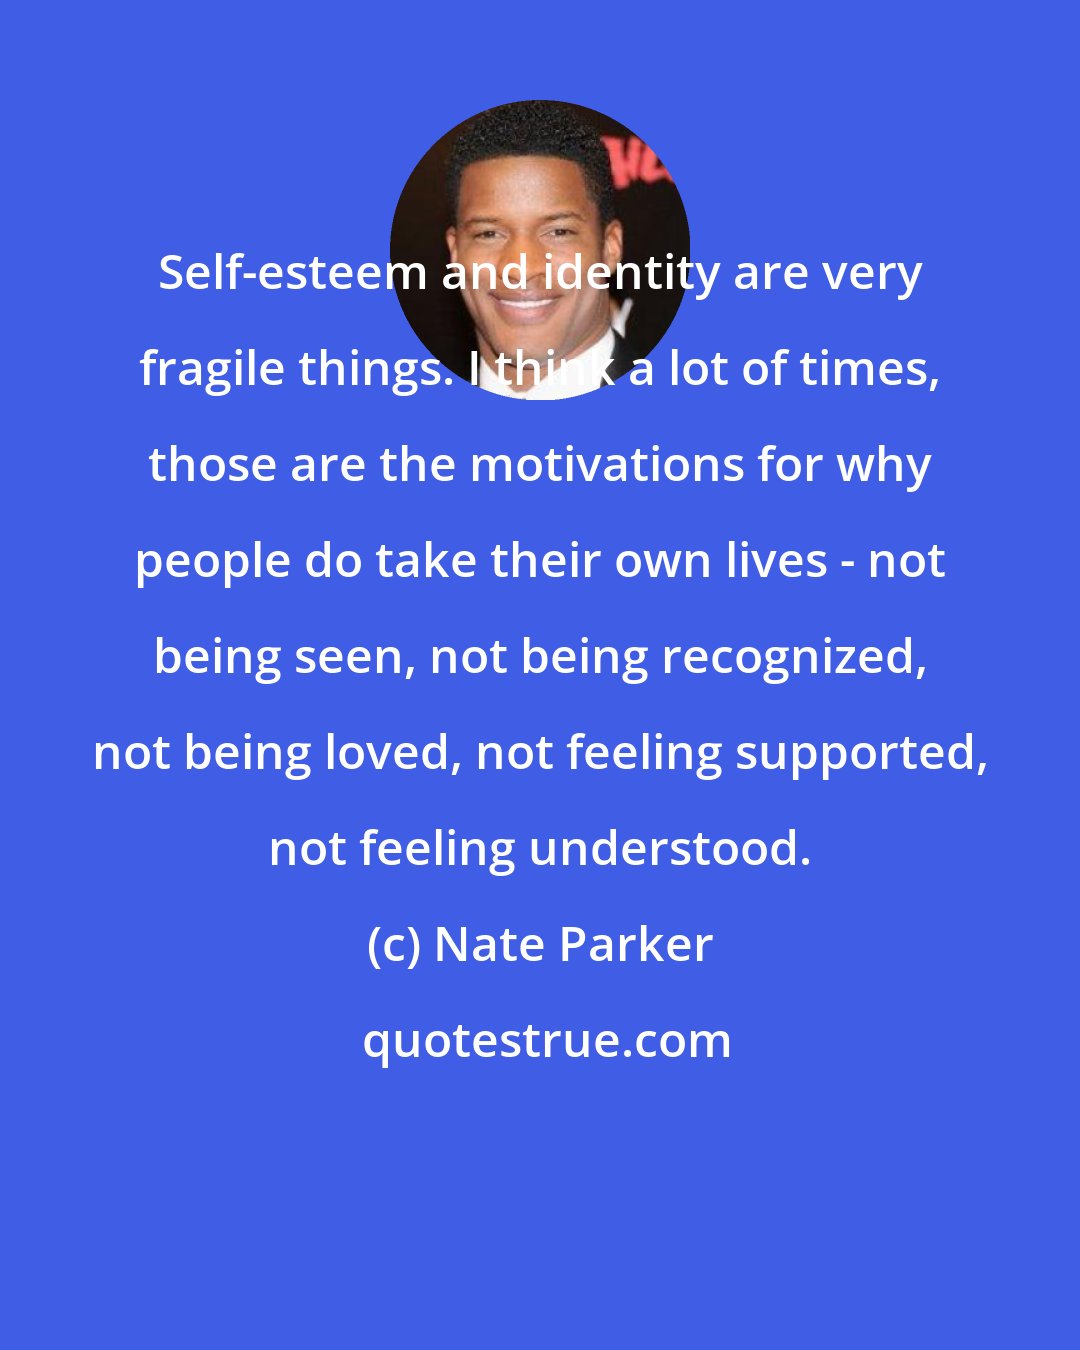 Nate Parker: Self-esteem and identity are very fragile things. I think a lot of times, those are the motivations for why people do take their own lives - not being seen, not being recognized, not being loved, not feeling supported, not feeling understood.